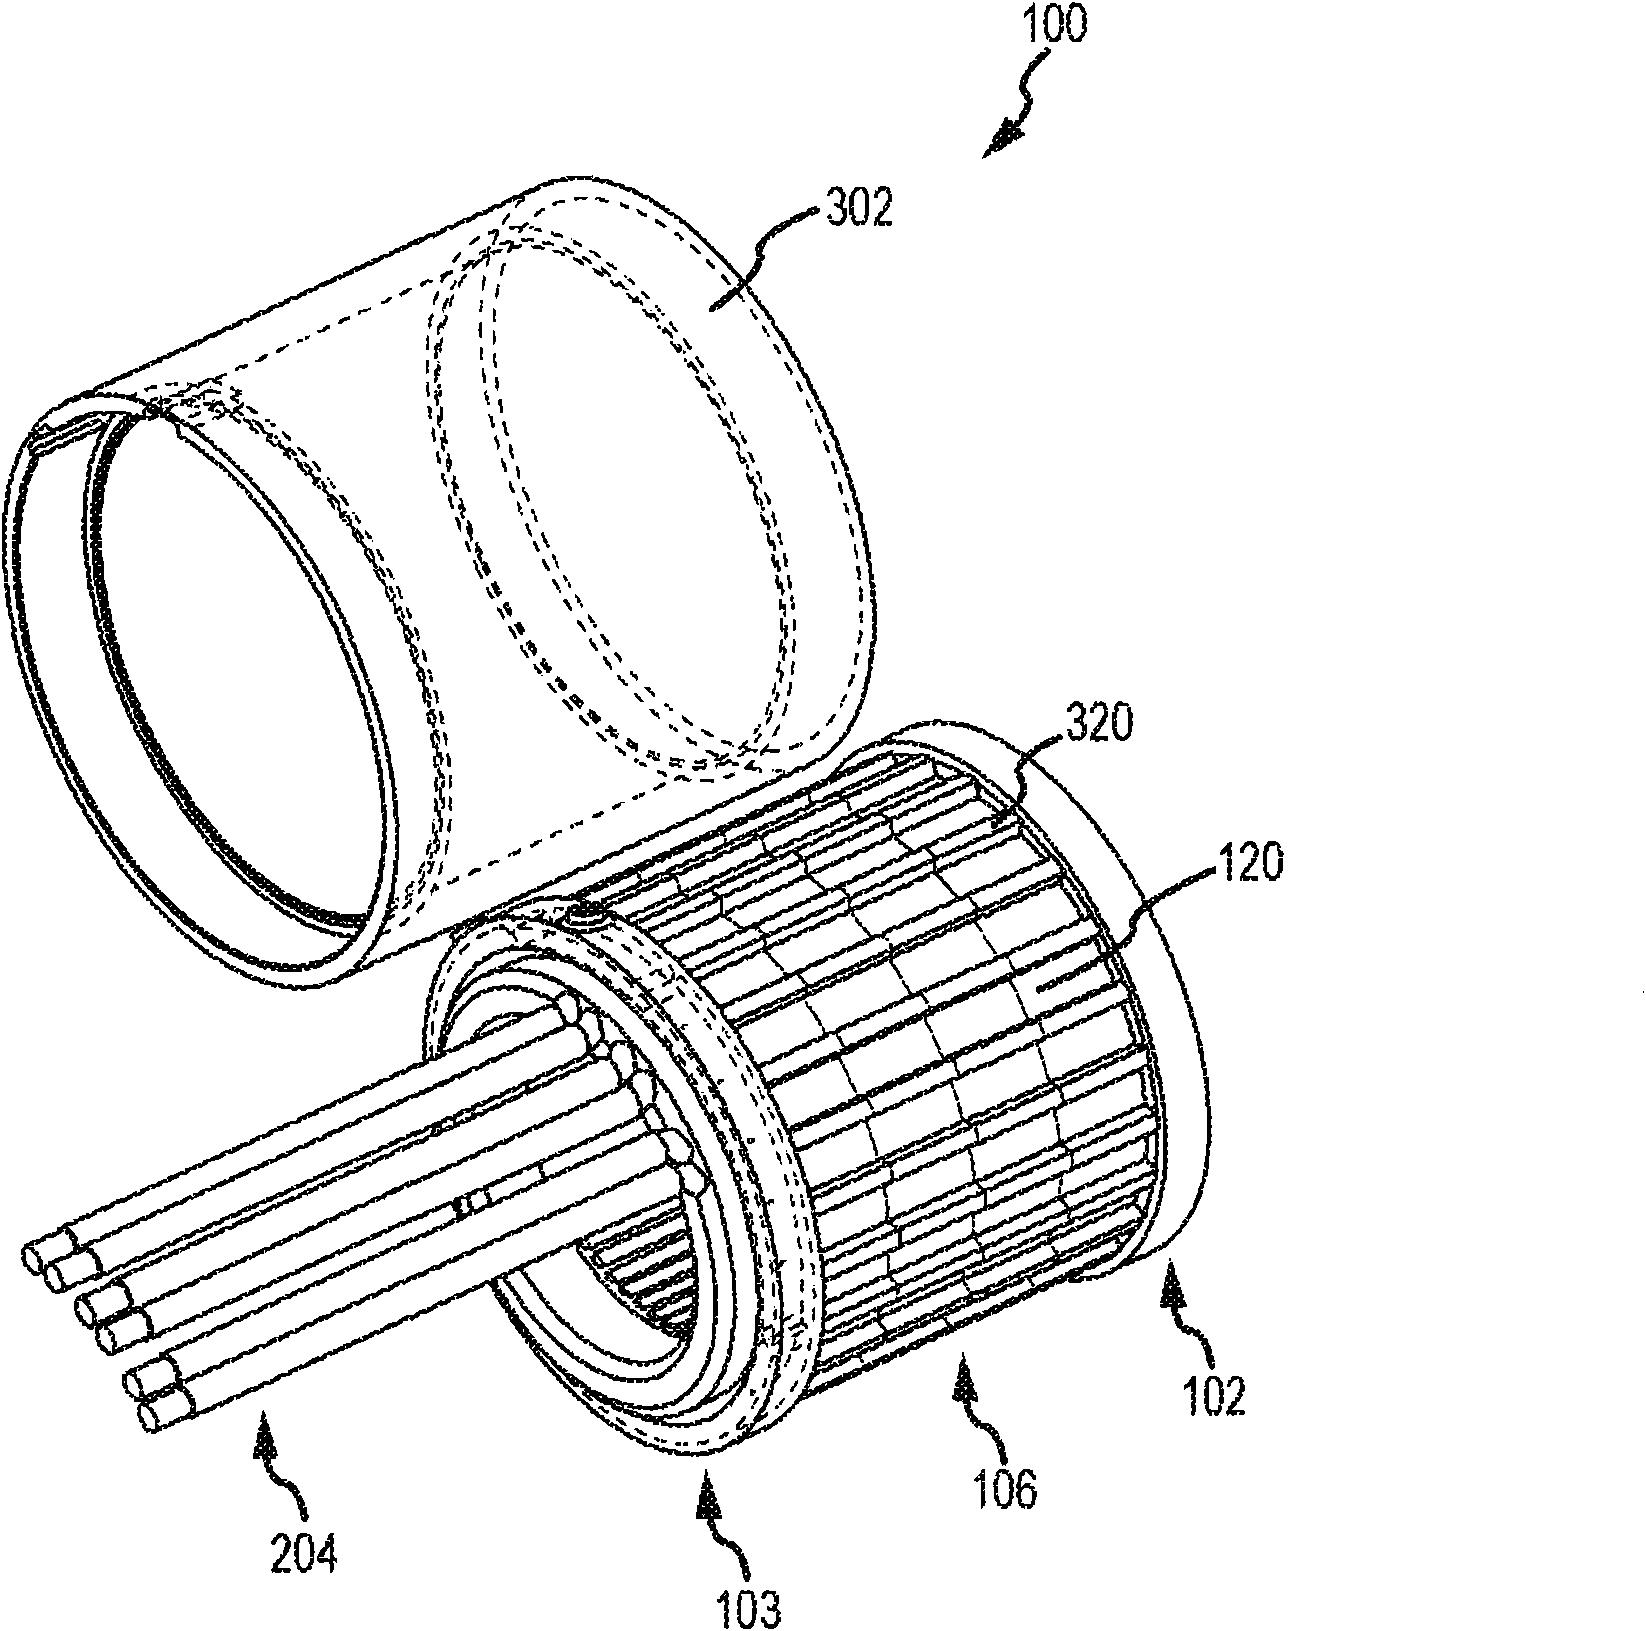 Methods and apparatus for a permanent magnet machine with a direct liquid cooled stator